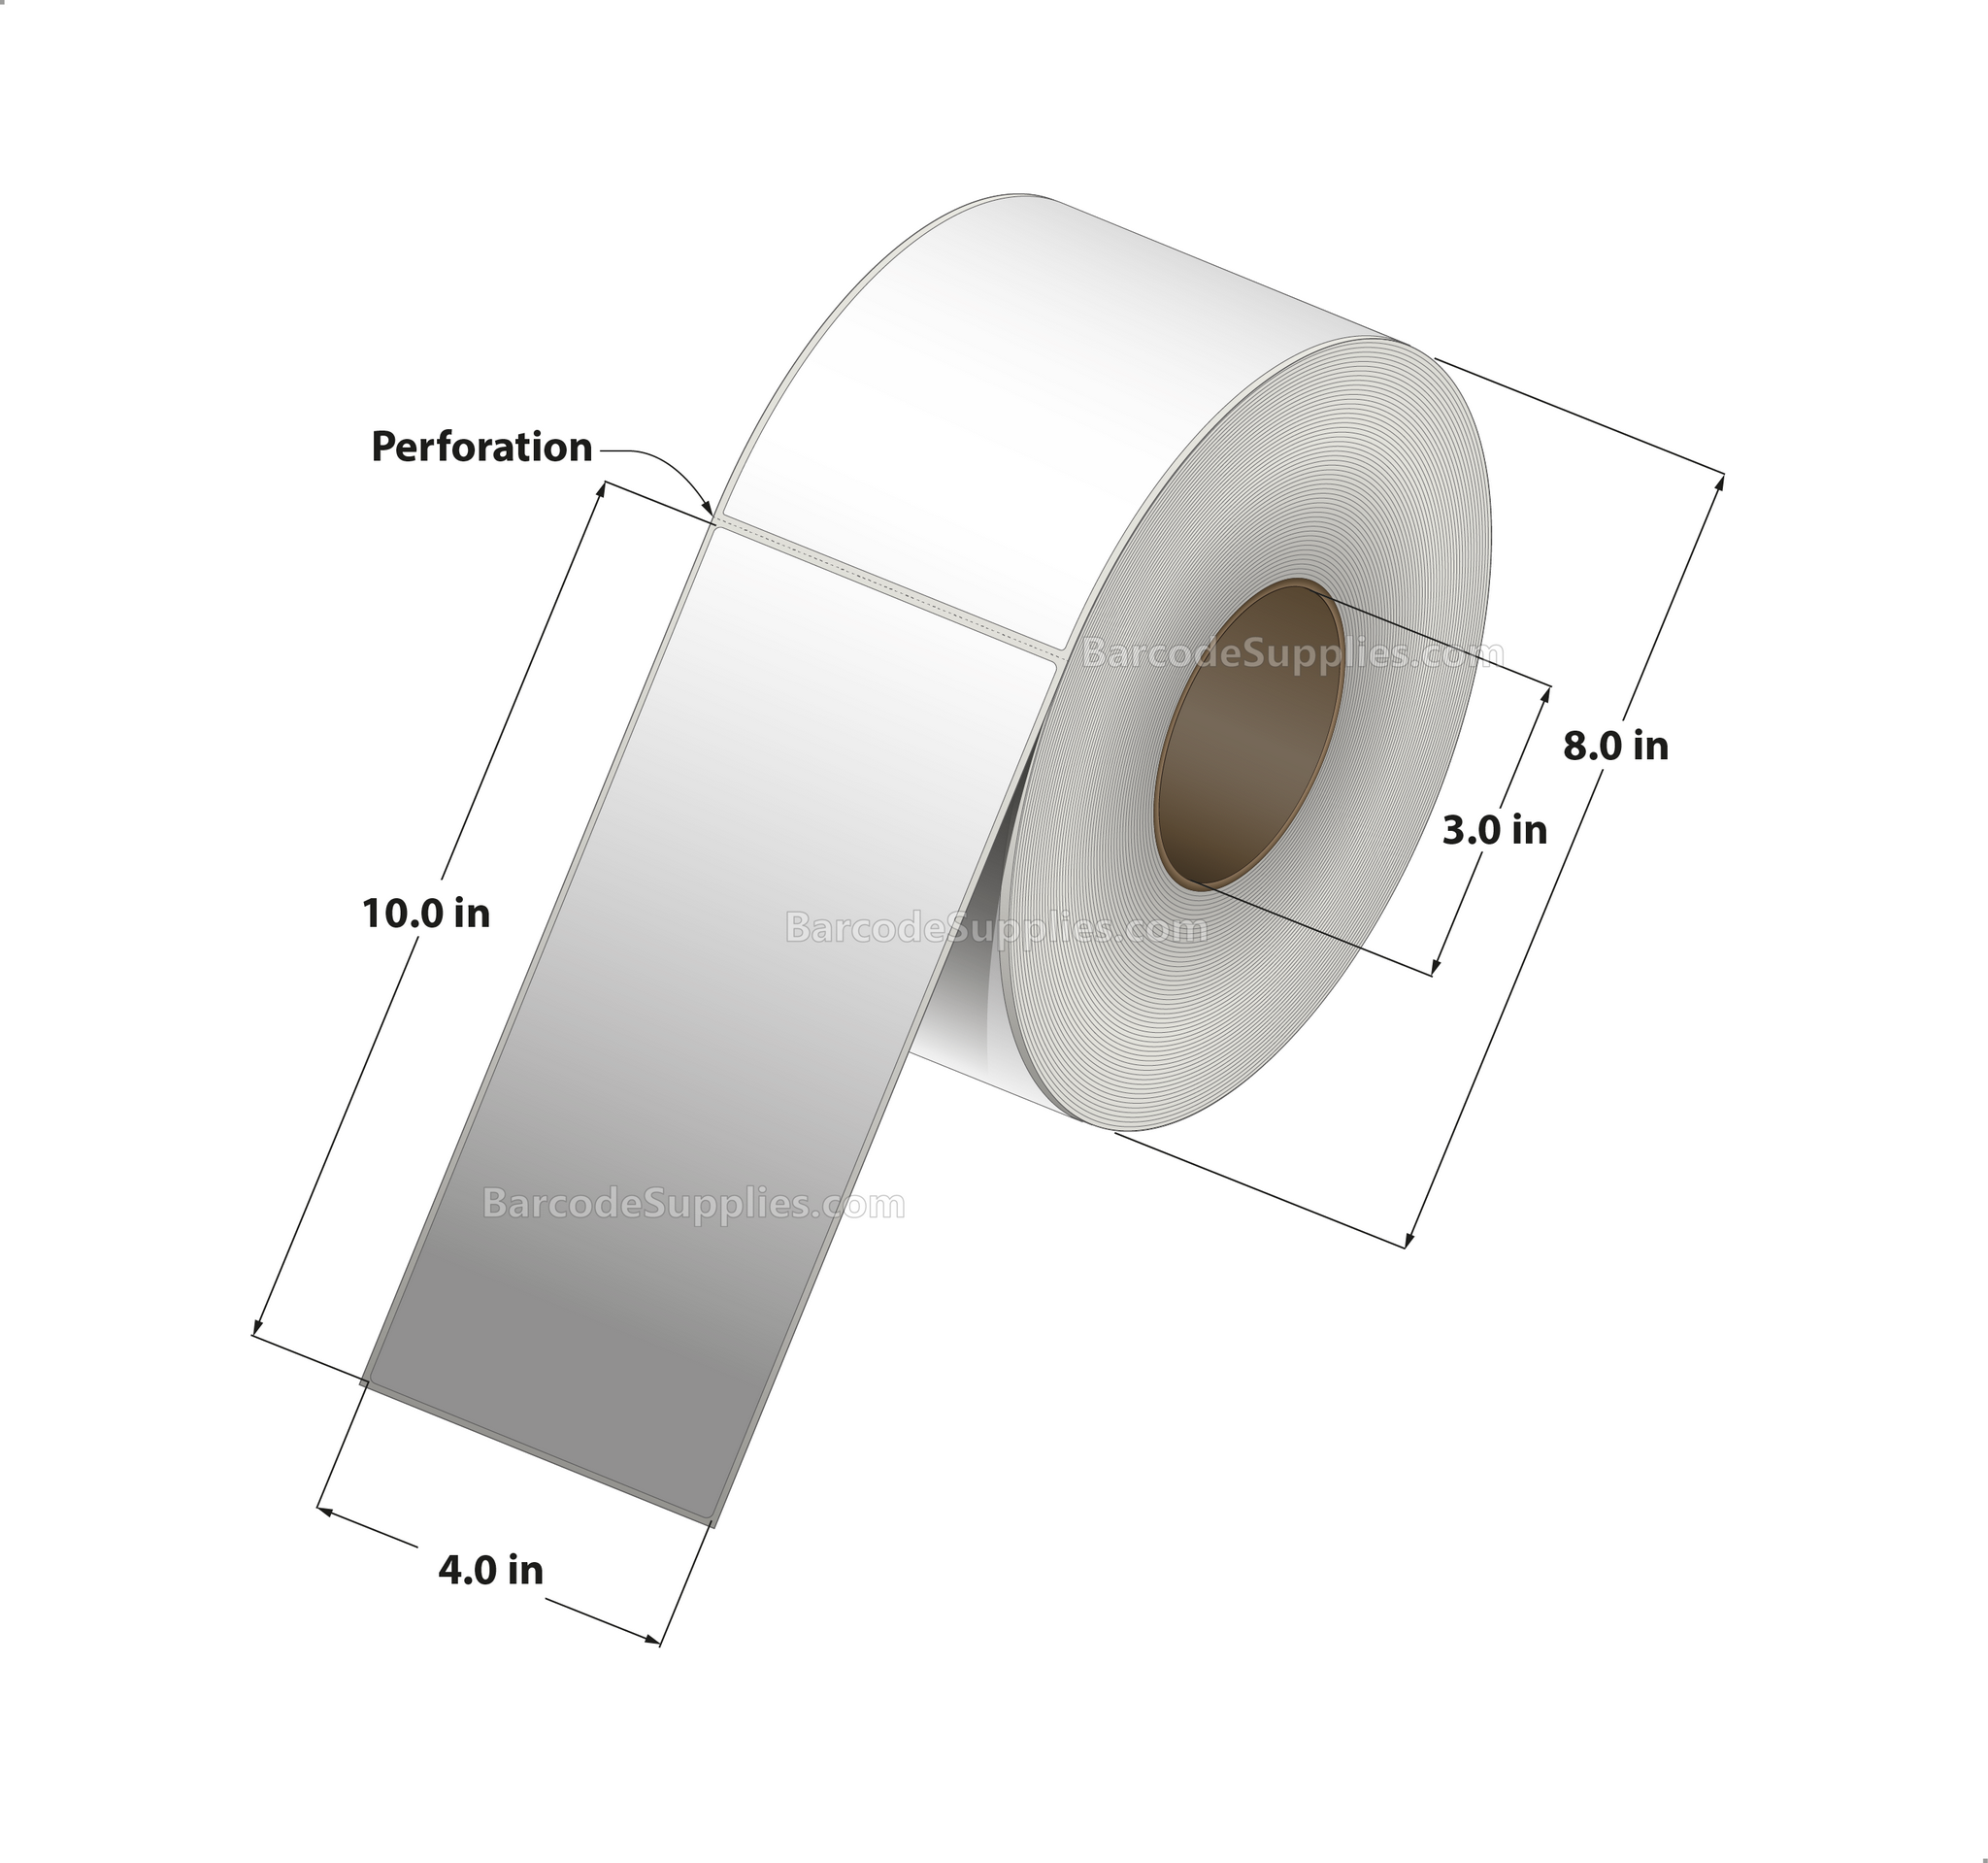 4 x 10 Thermal Transfer White Labels With Permanent Acrylic Adhesive - Perforated - 600 Labels Per Roll - Carton Of 4 Rolls - 2400 Labels Total - MPN: TH410-1P